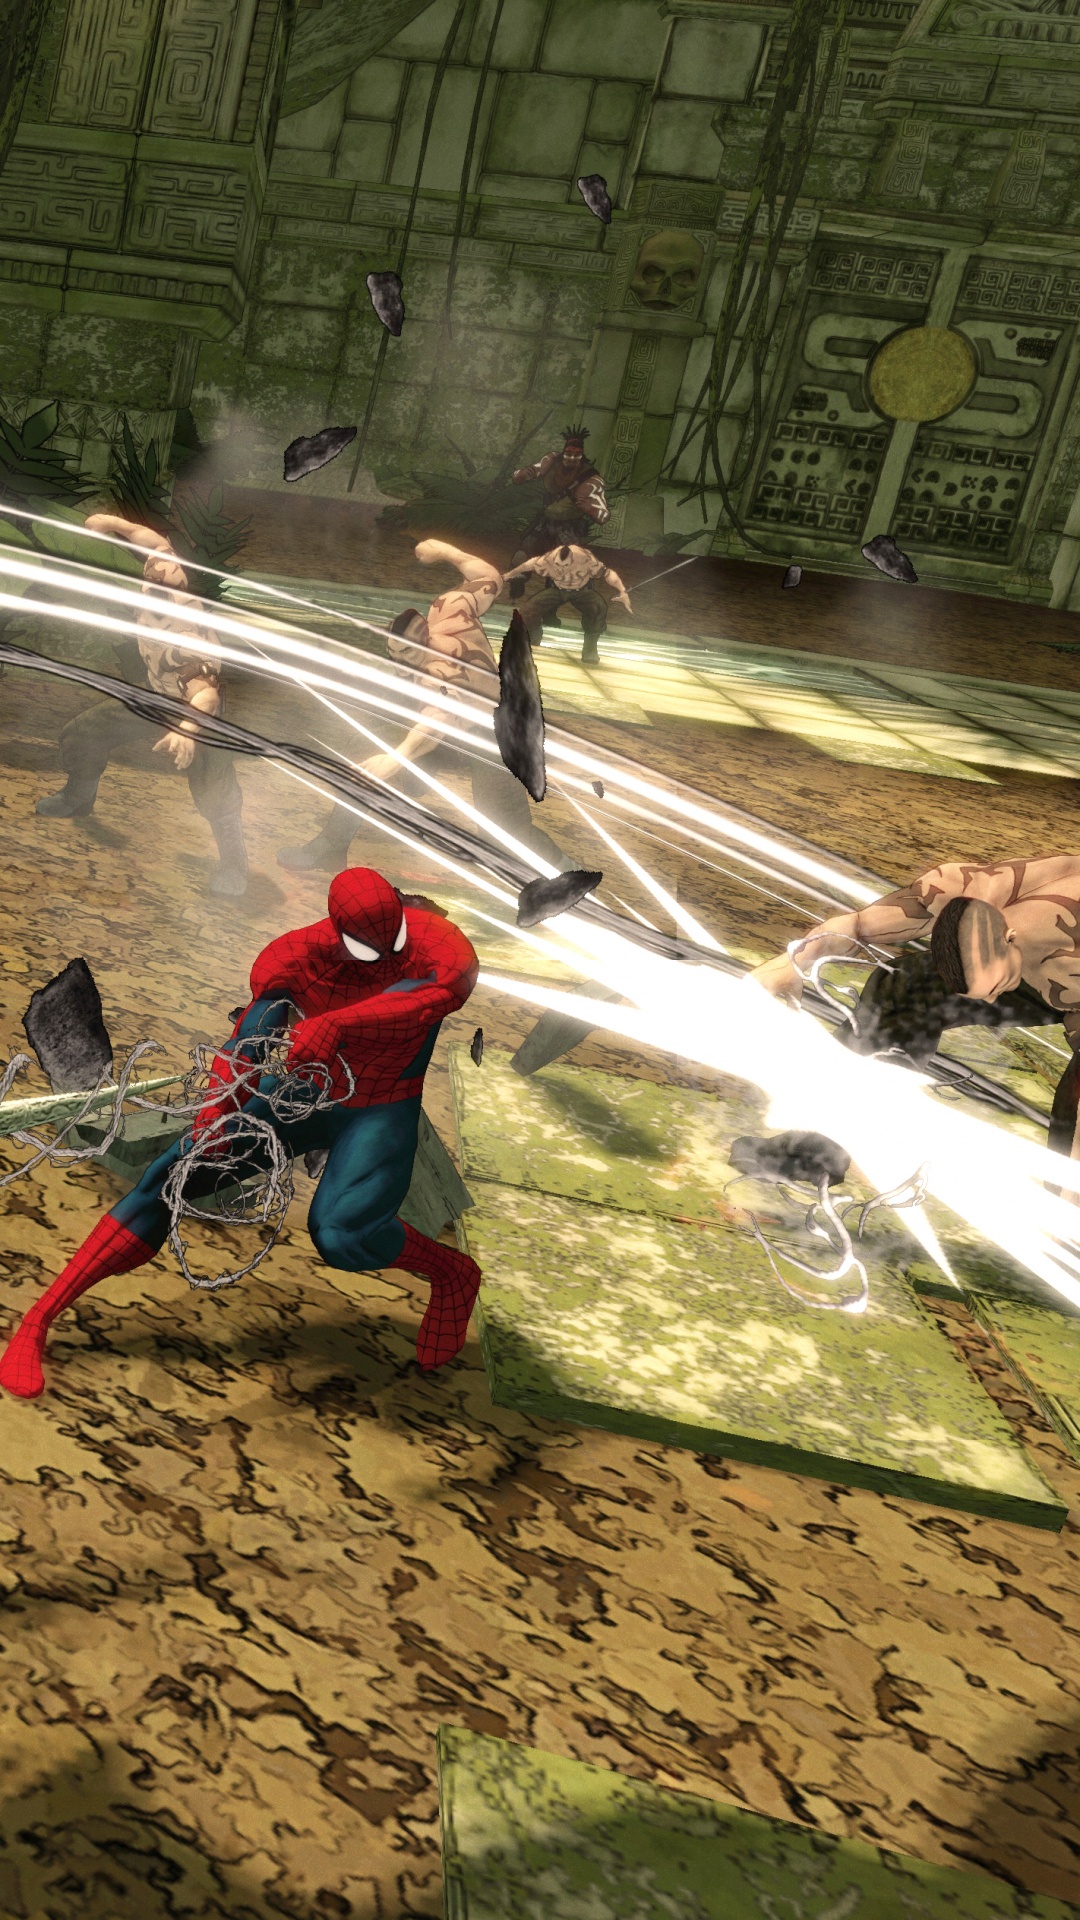 Spider-Man Shattered Dimensions, Spider-man, Xbox 360, Wii, Juego de Pc. Wallpaper in 1080x1920 Resolution